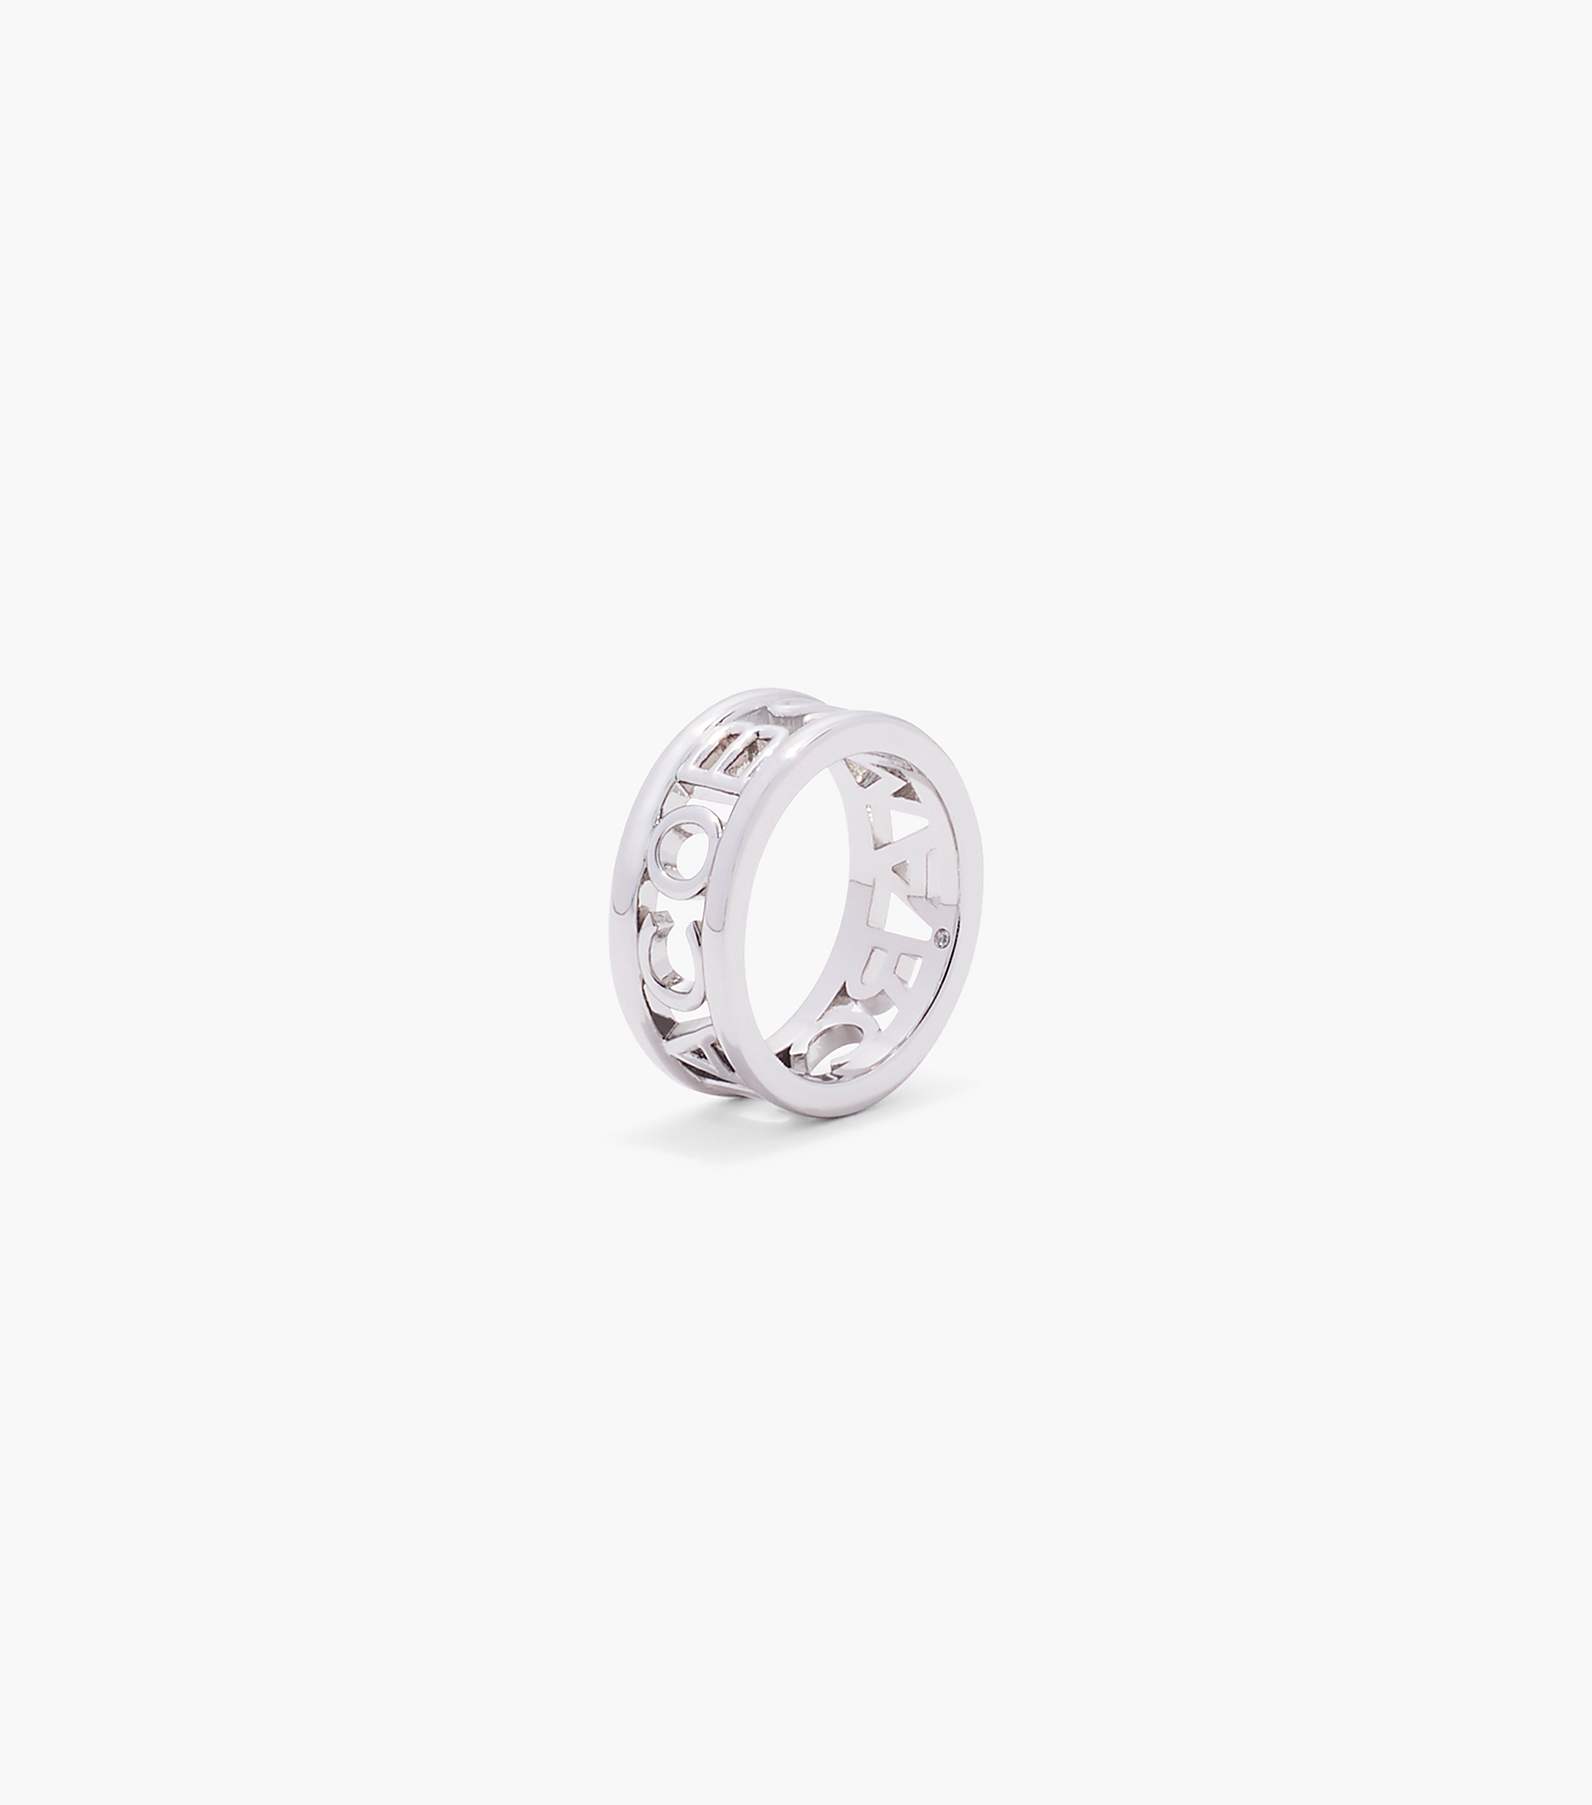 The Monogram Ring | Marc Jacobs | Official Site